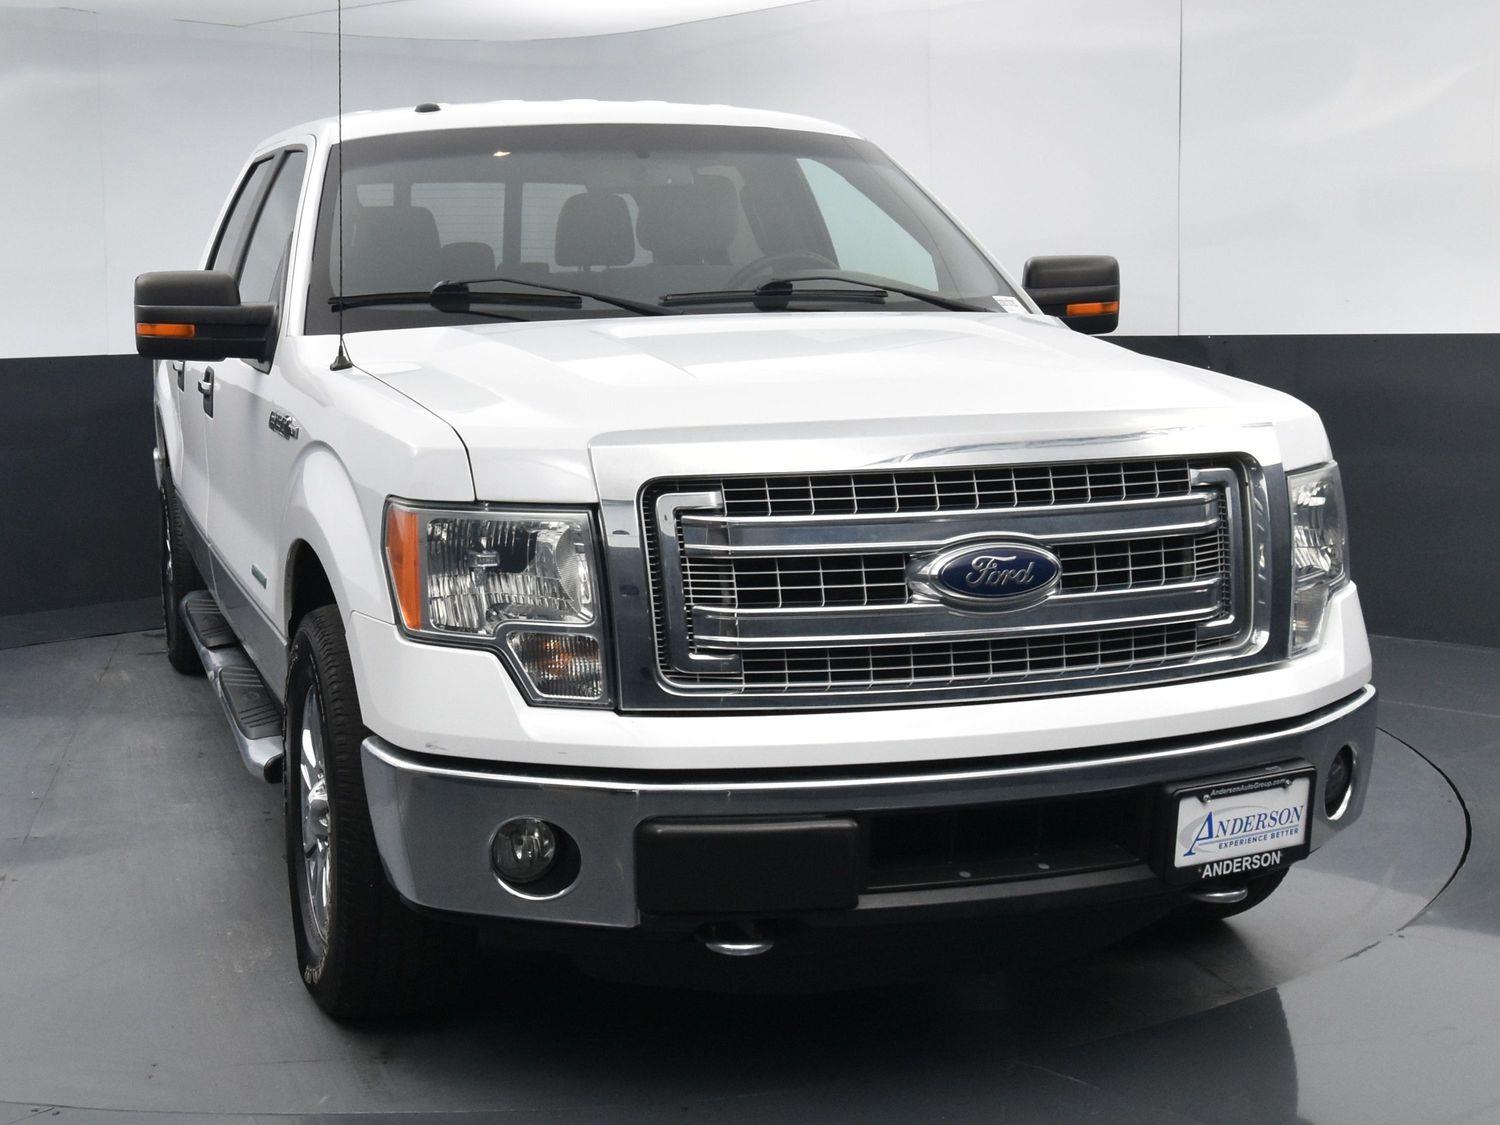 Used 2014 Ford F-150 XLT SuperCrew Cab Styleside for sale in Grand Island NE